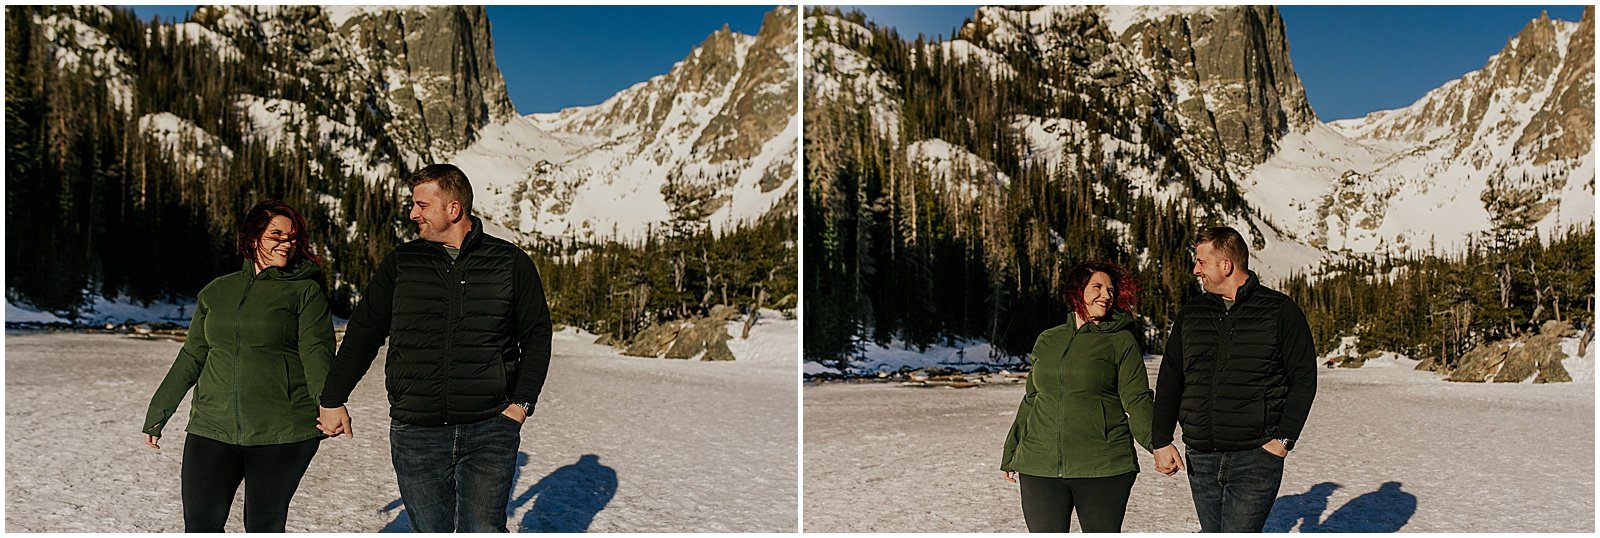 Mountain-Engagement-Photos-AndreaWagnerPhotography_0018.jpg